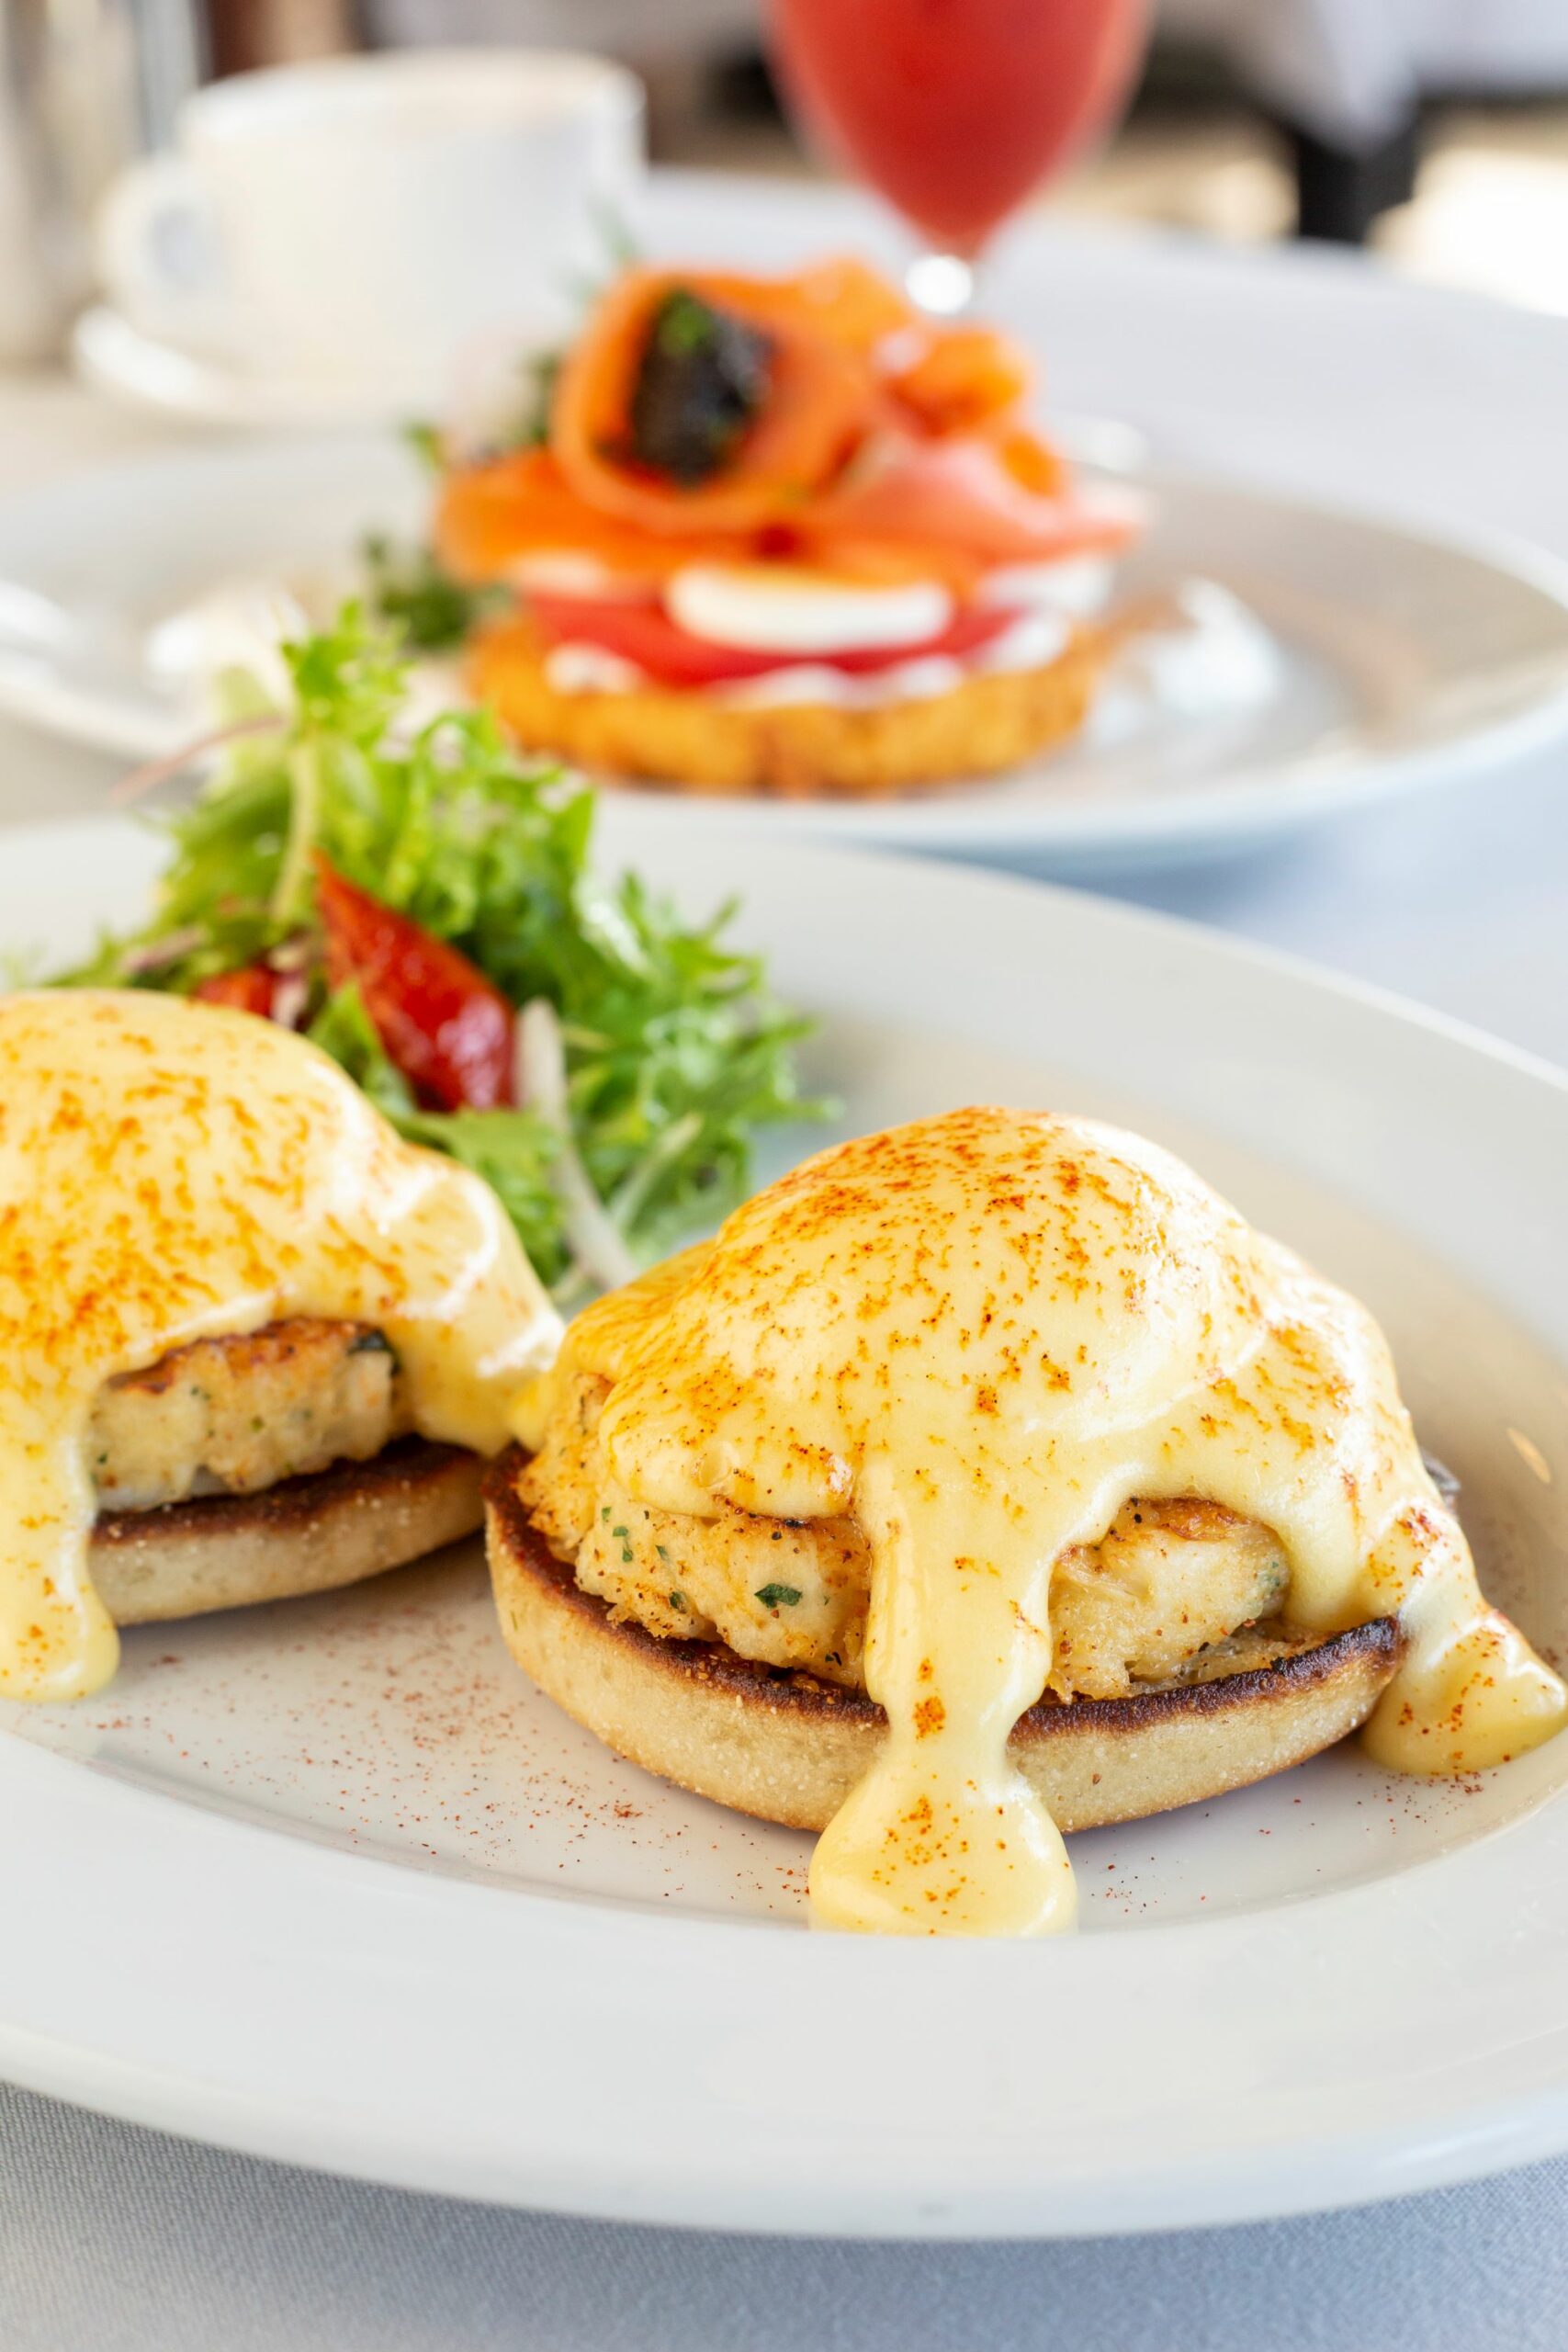 An image of the Crab Cake Eggs Benedict from Ocean Prime.